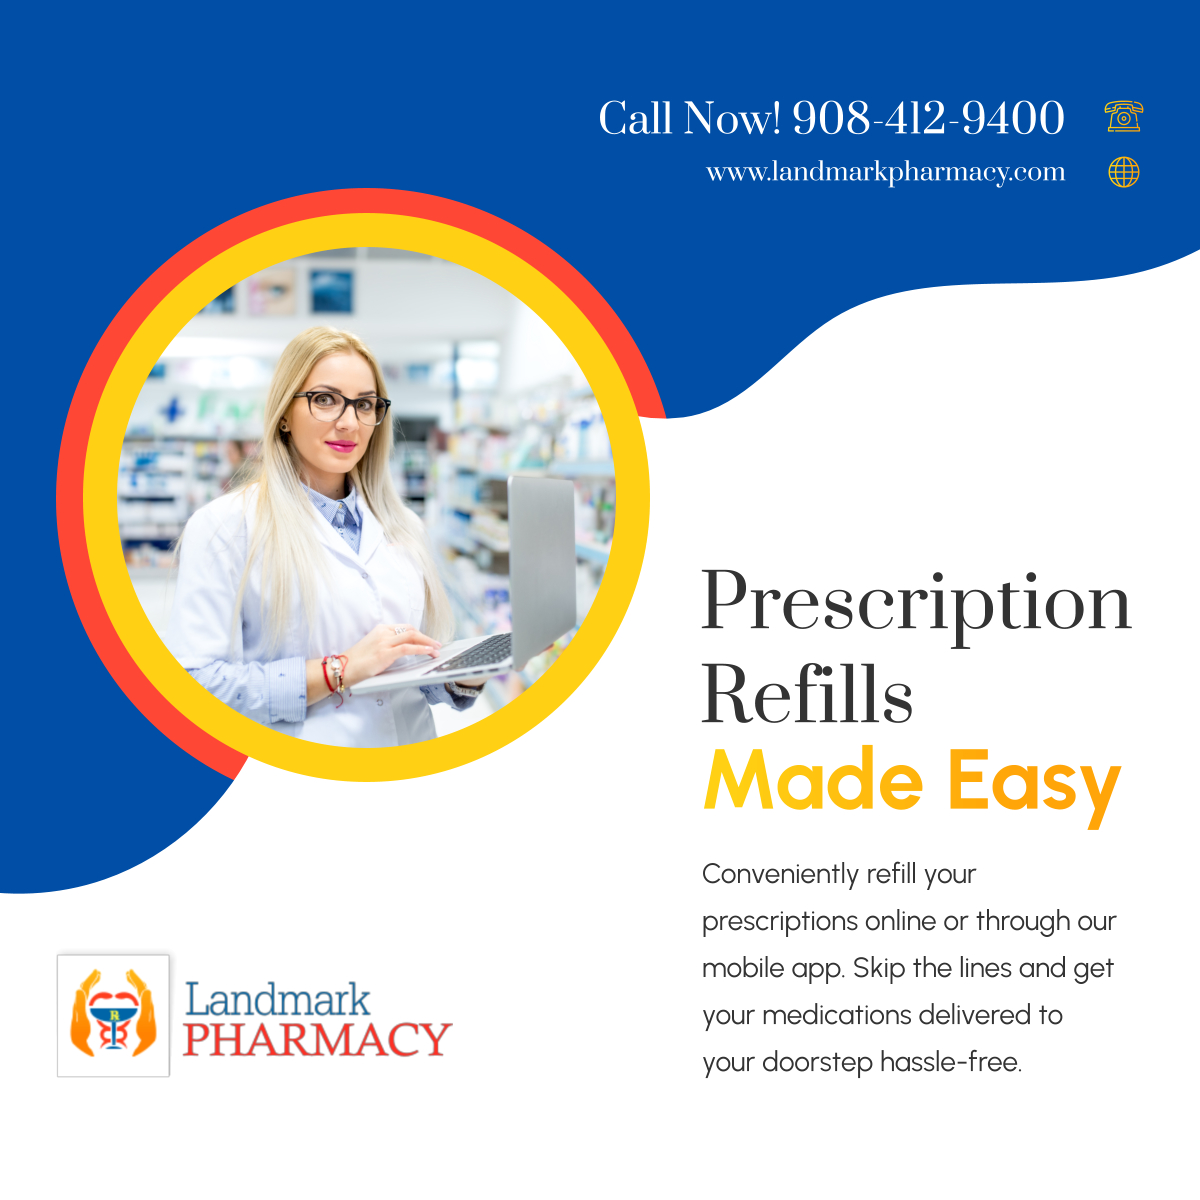 Refill prescriptions hassle-free online or via our app. Skip the lines and get medications delivered to your doorstep. 

#PrescriptionRefill #NorthPlainfieldNJ #RetailPharmacy